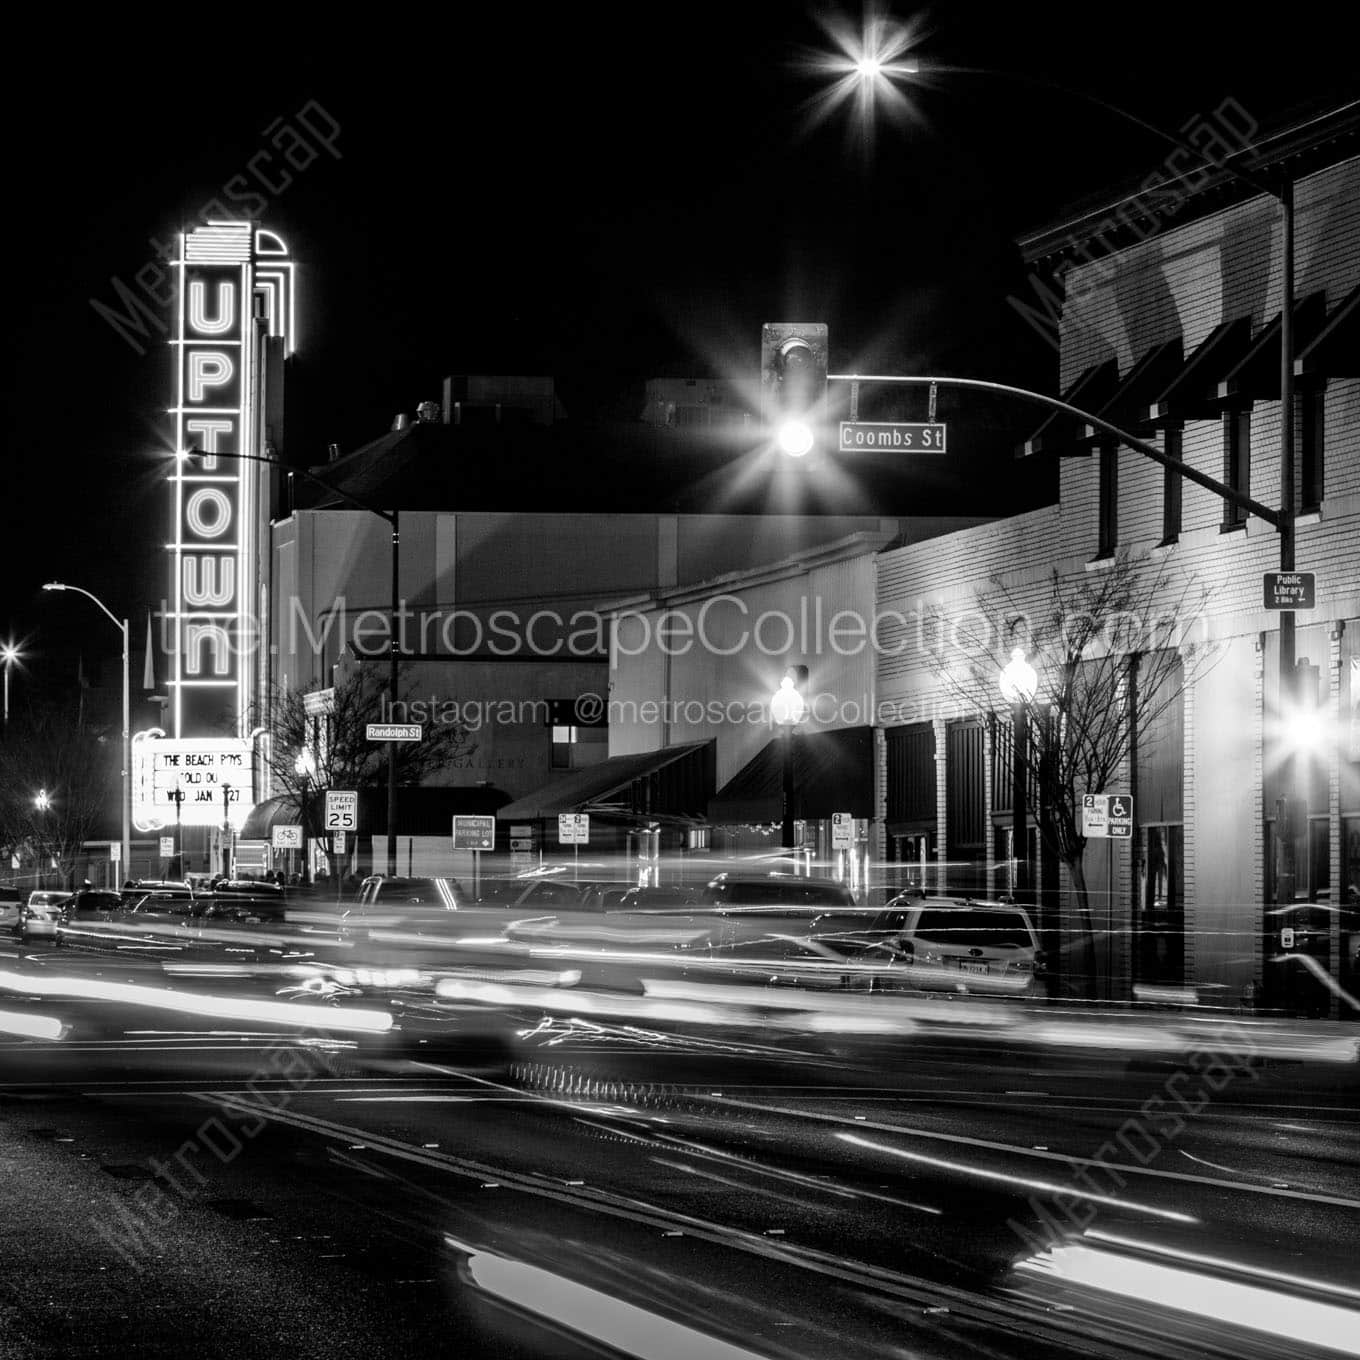 uptown theater at night downtown napa Black & White Wall Art